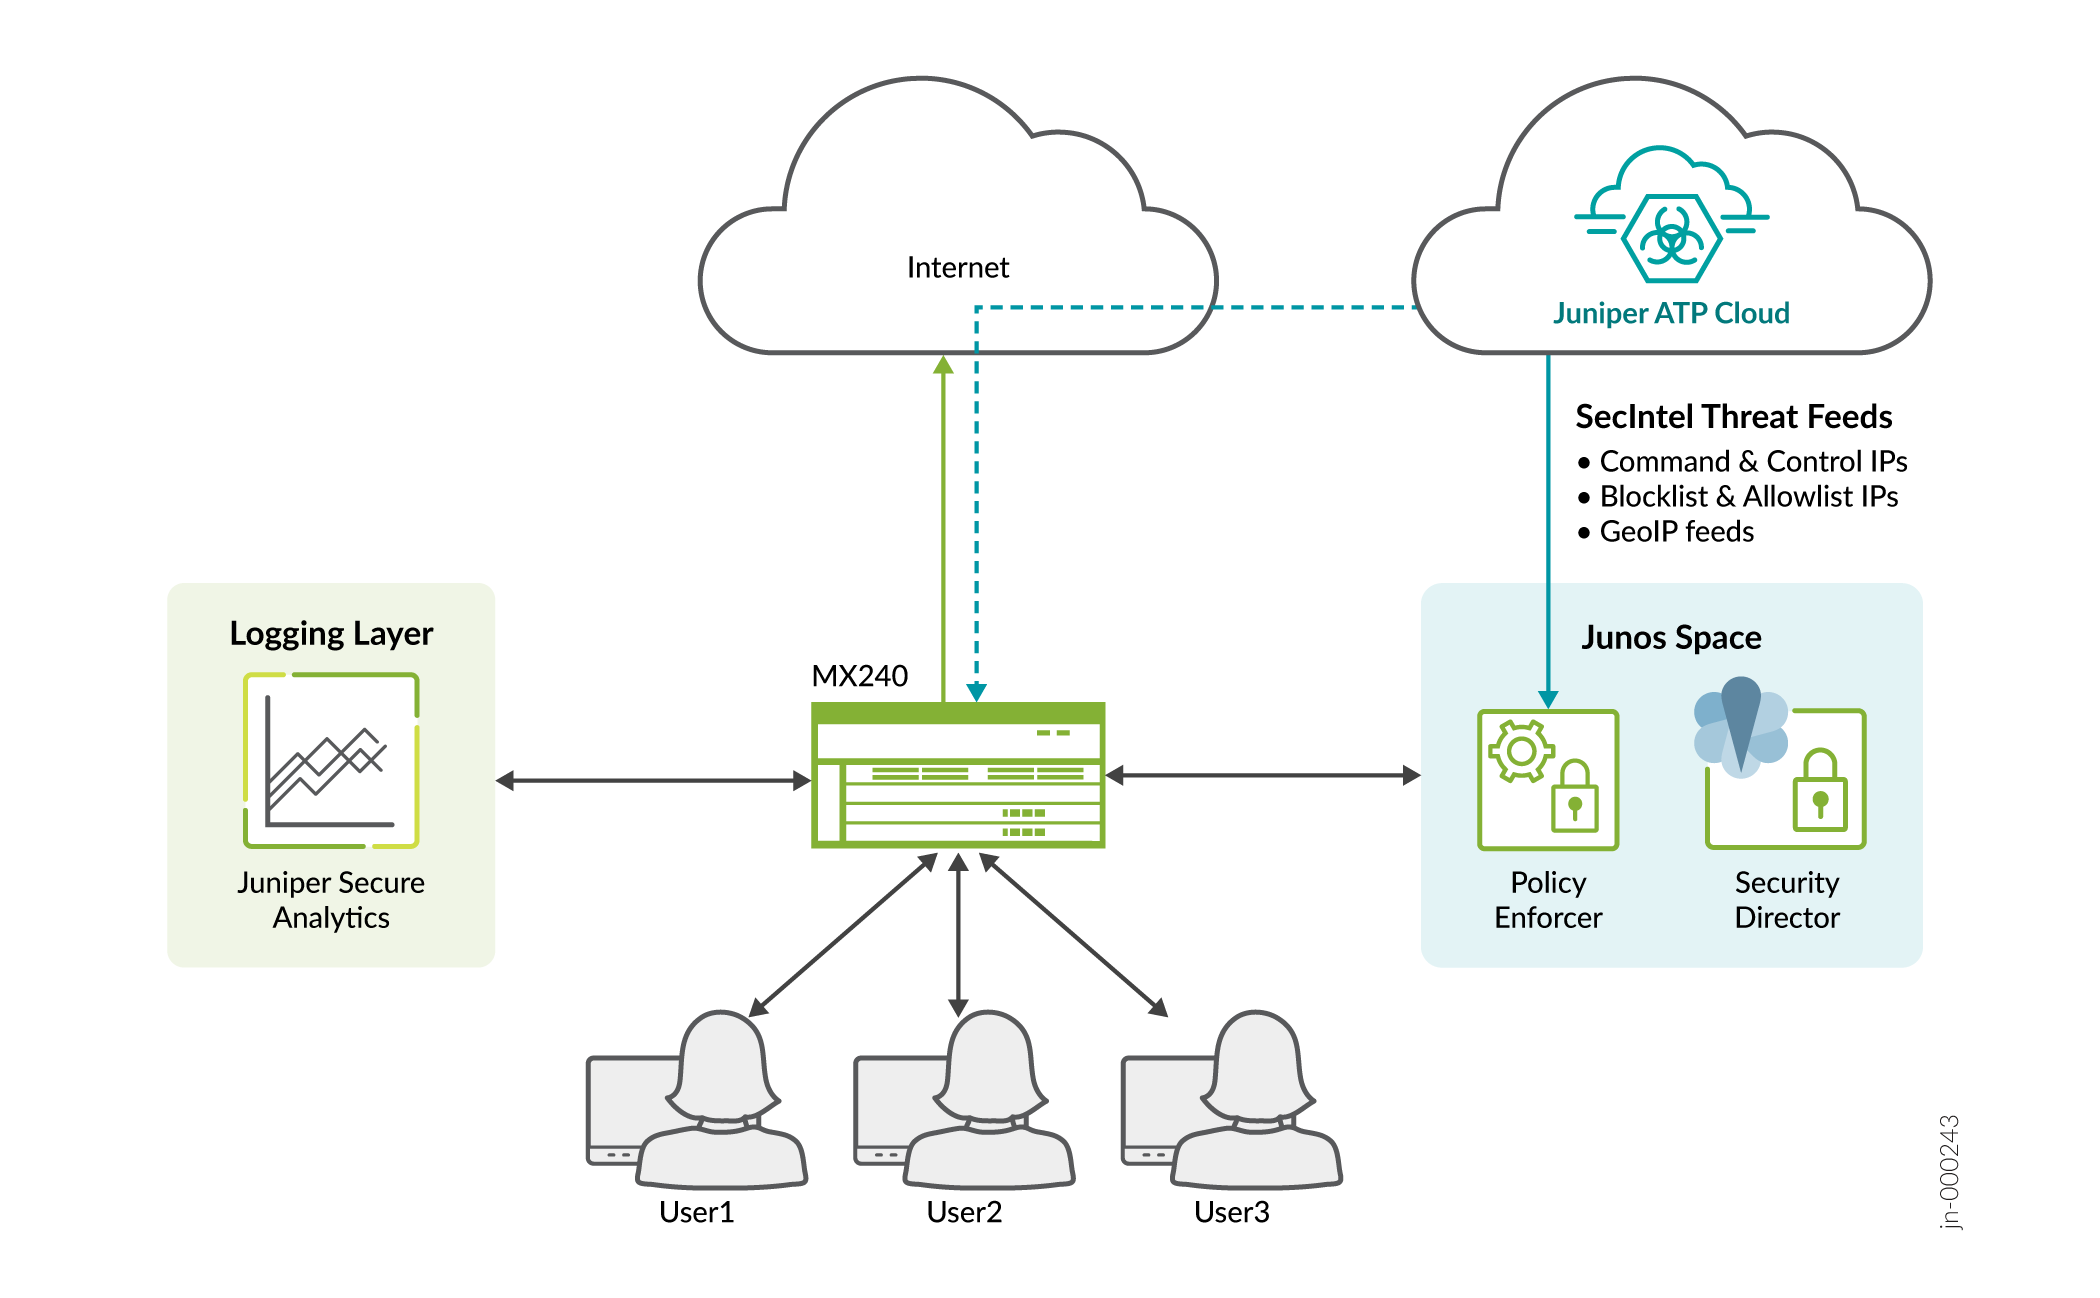 Usecase 2: Enrollment to Juniper ATP Cloud Using Junos Space Security Director and Policy Enforcer.